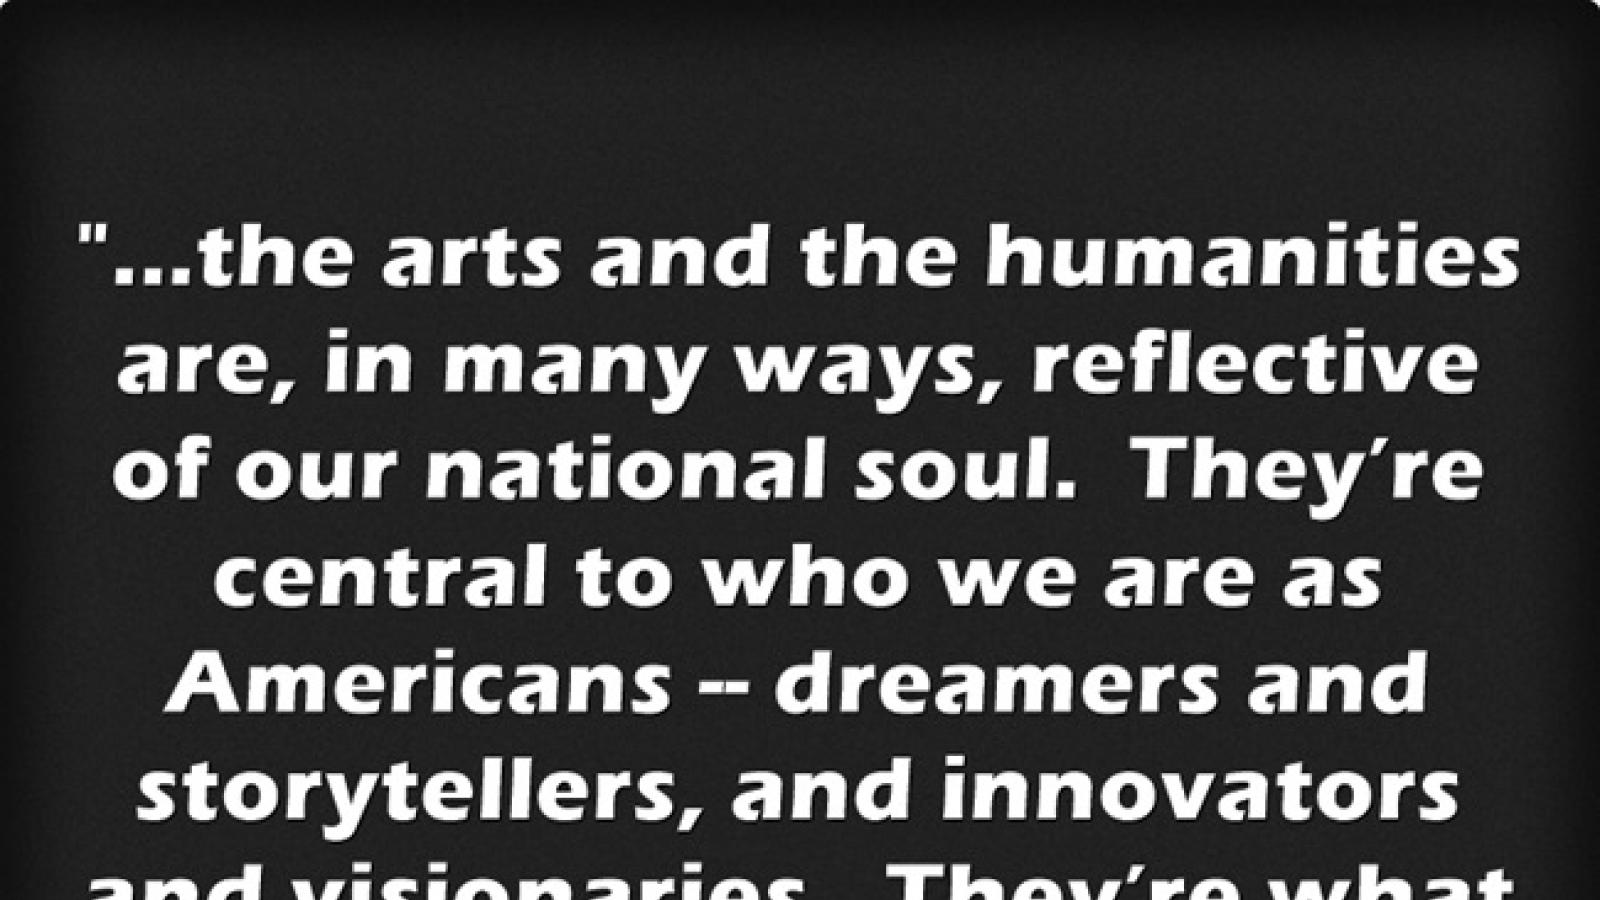 excerpt from POTUS speech at arts and humanities medal ceremony. The arts and humanities are in  many ways reflective of our national soul.